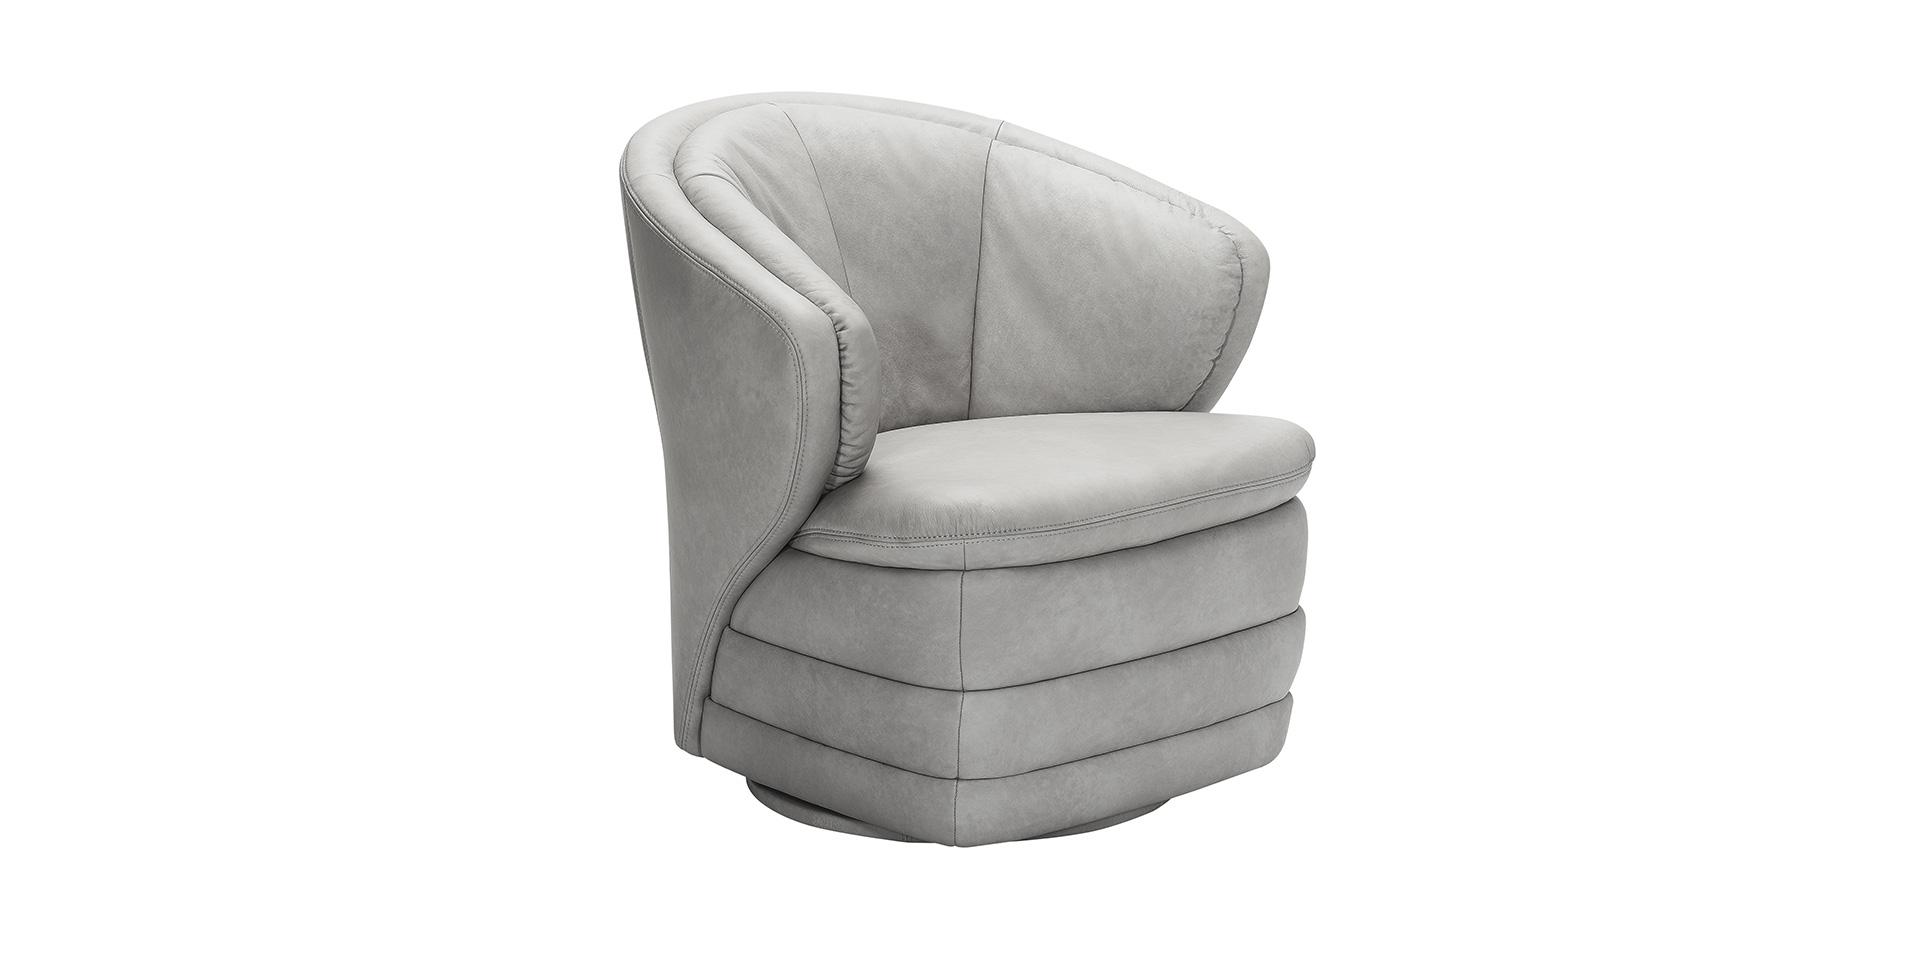 Slider Fauteuil relaxation 7360 (image 3)